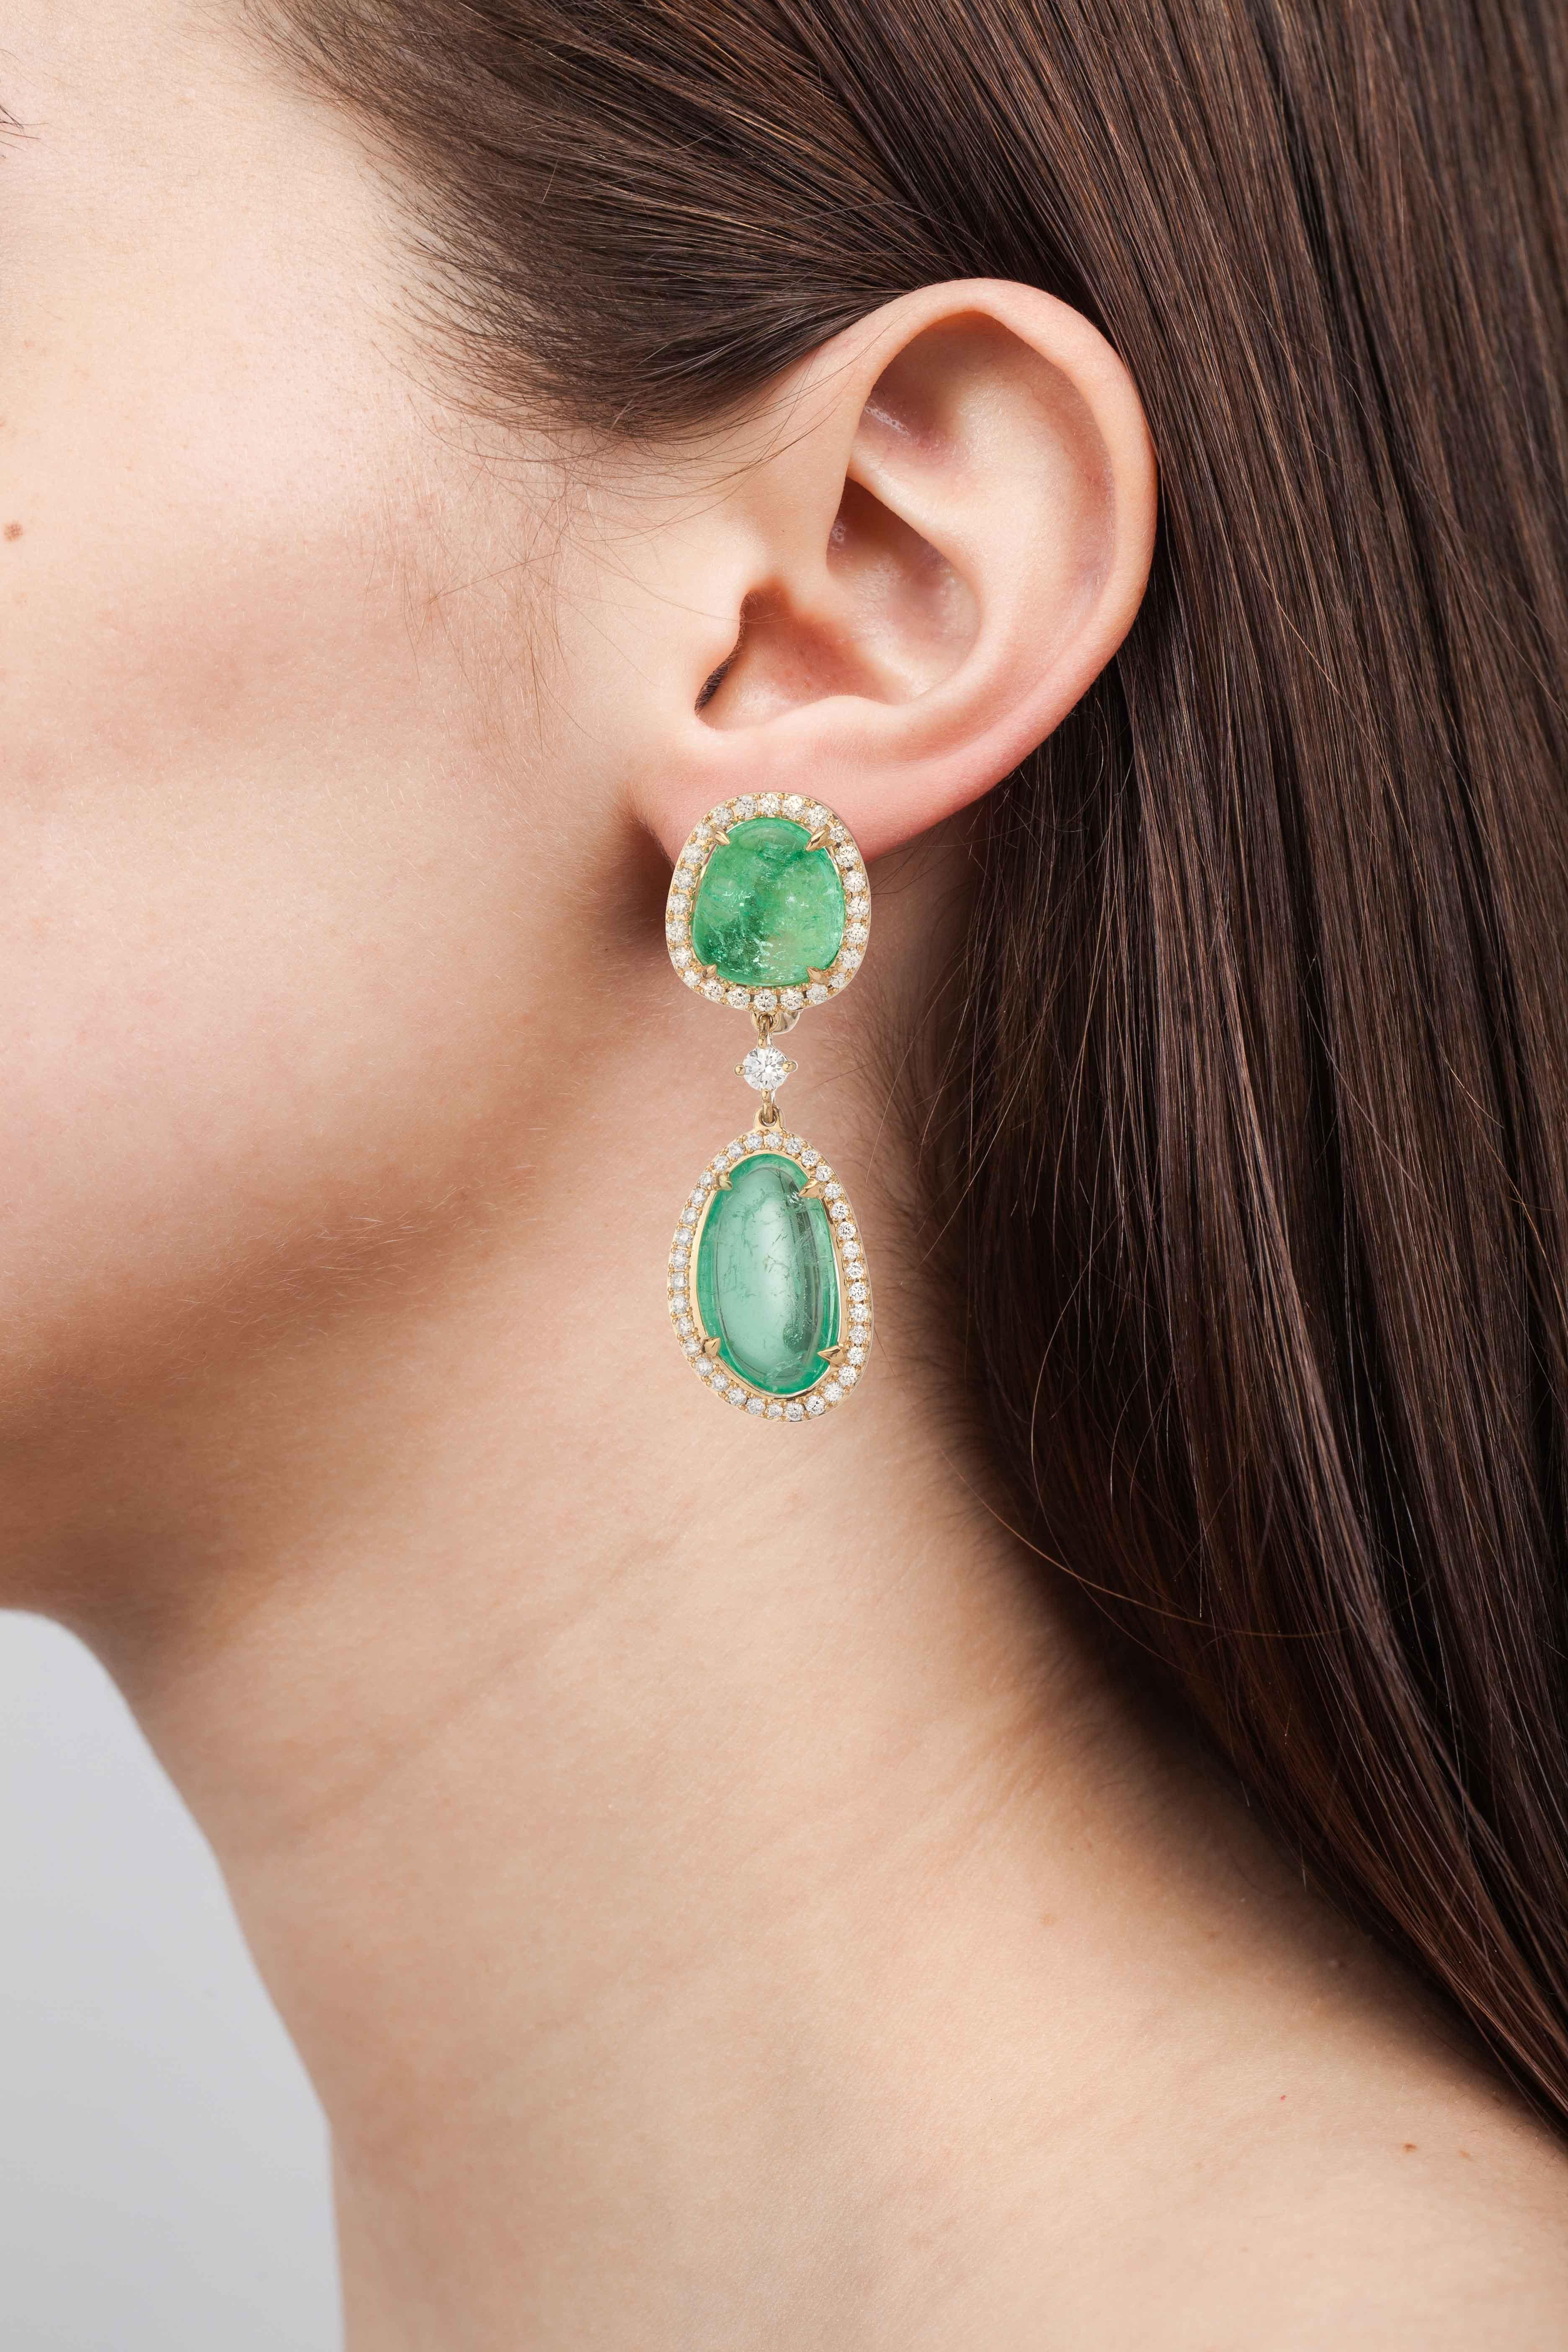 18 Karat yellow gold dangle earrings set with organic tumbled Muzo emeralds of 32.67 carats surrounded by 1.69 carats of round brilliant diamond pave.

Muzo Emerald Colombia Heritage Verity Earrings set with 32.67 carats Emerald.

Verity is a